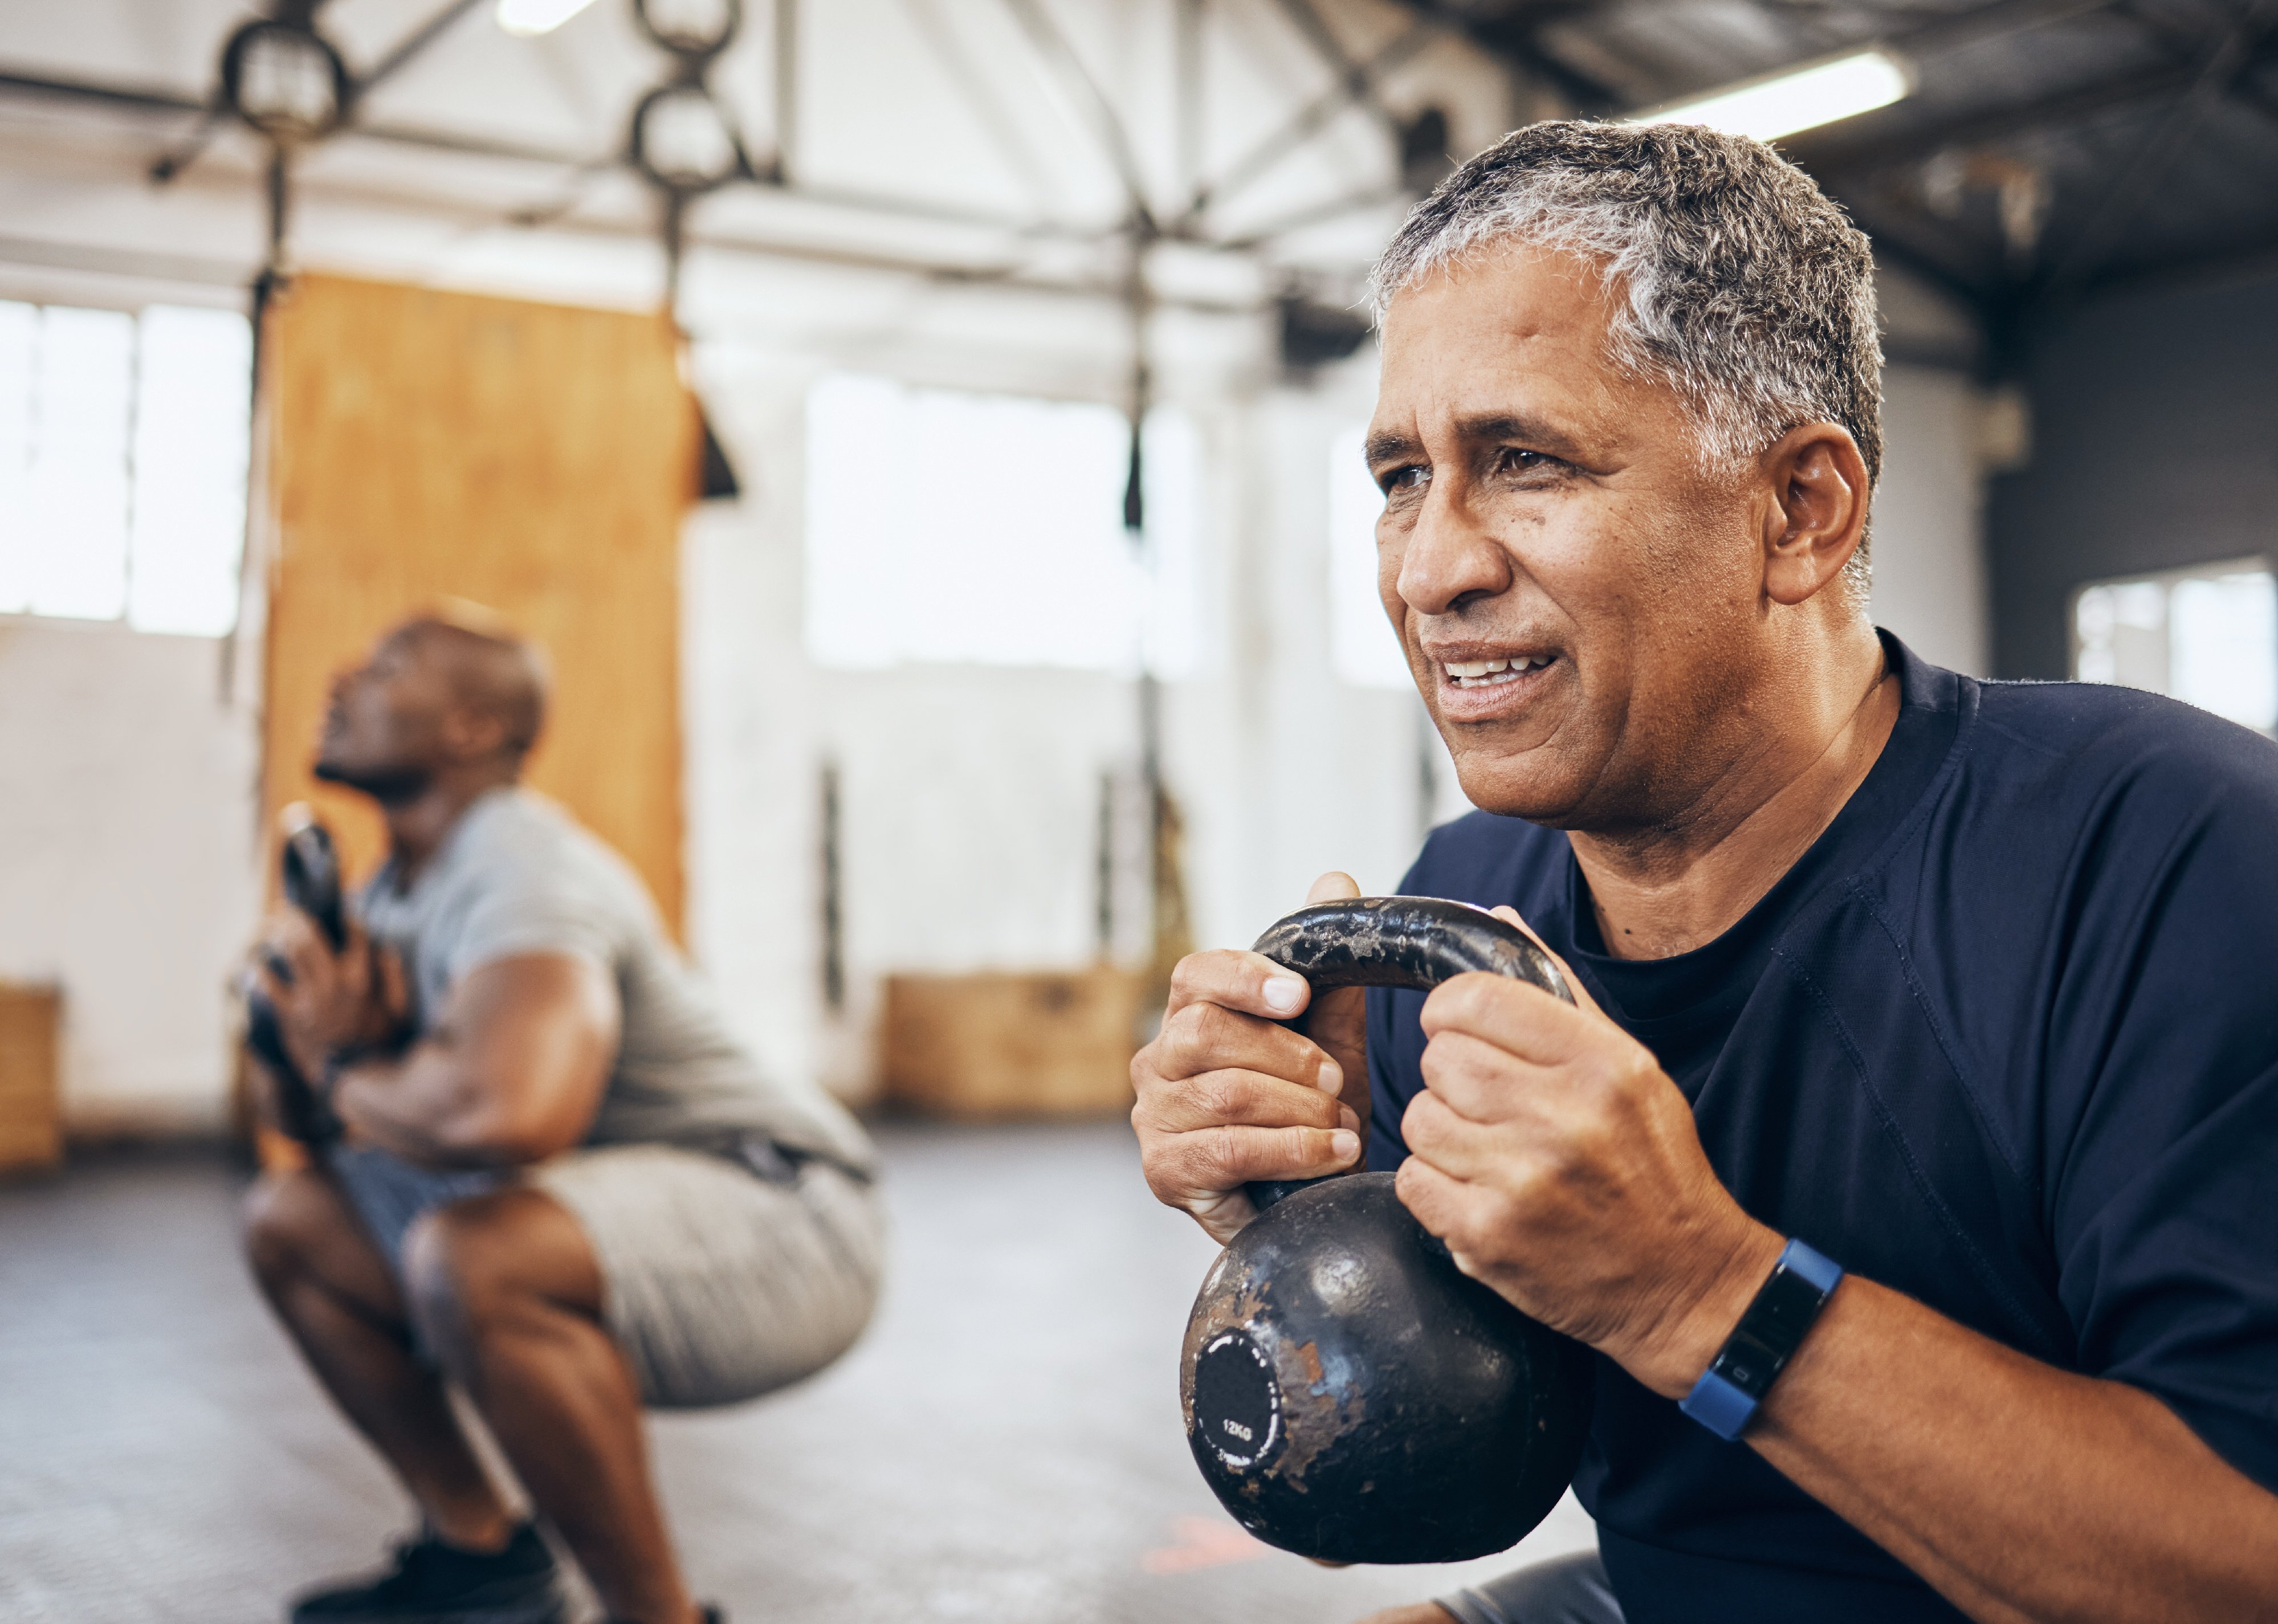 Two men squat with kettlebell equipment in a gym.